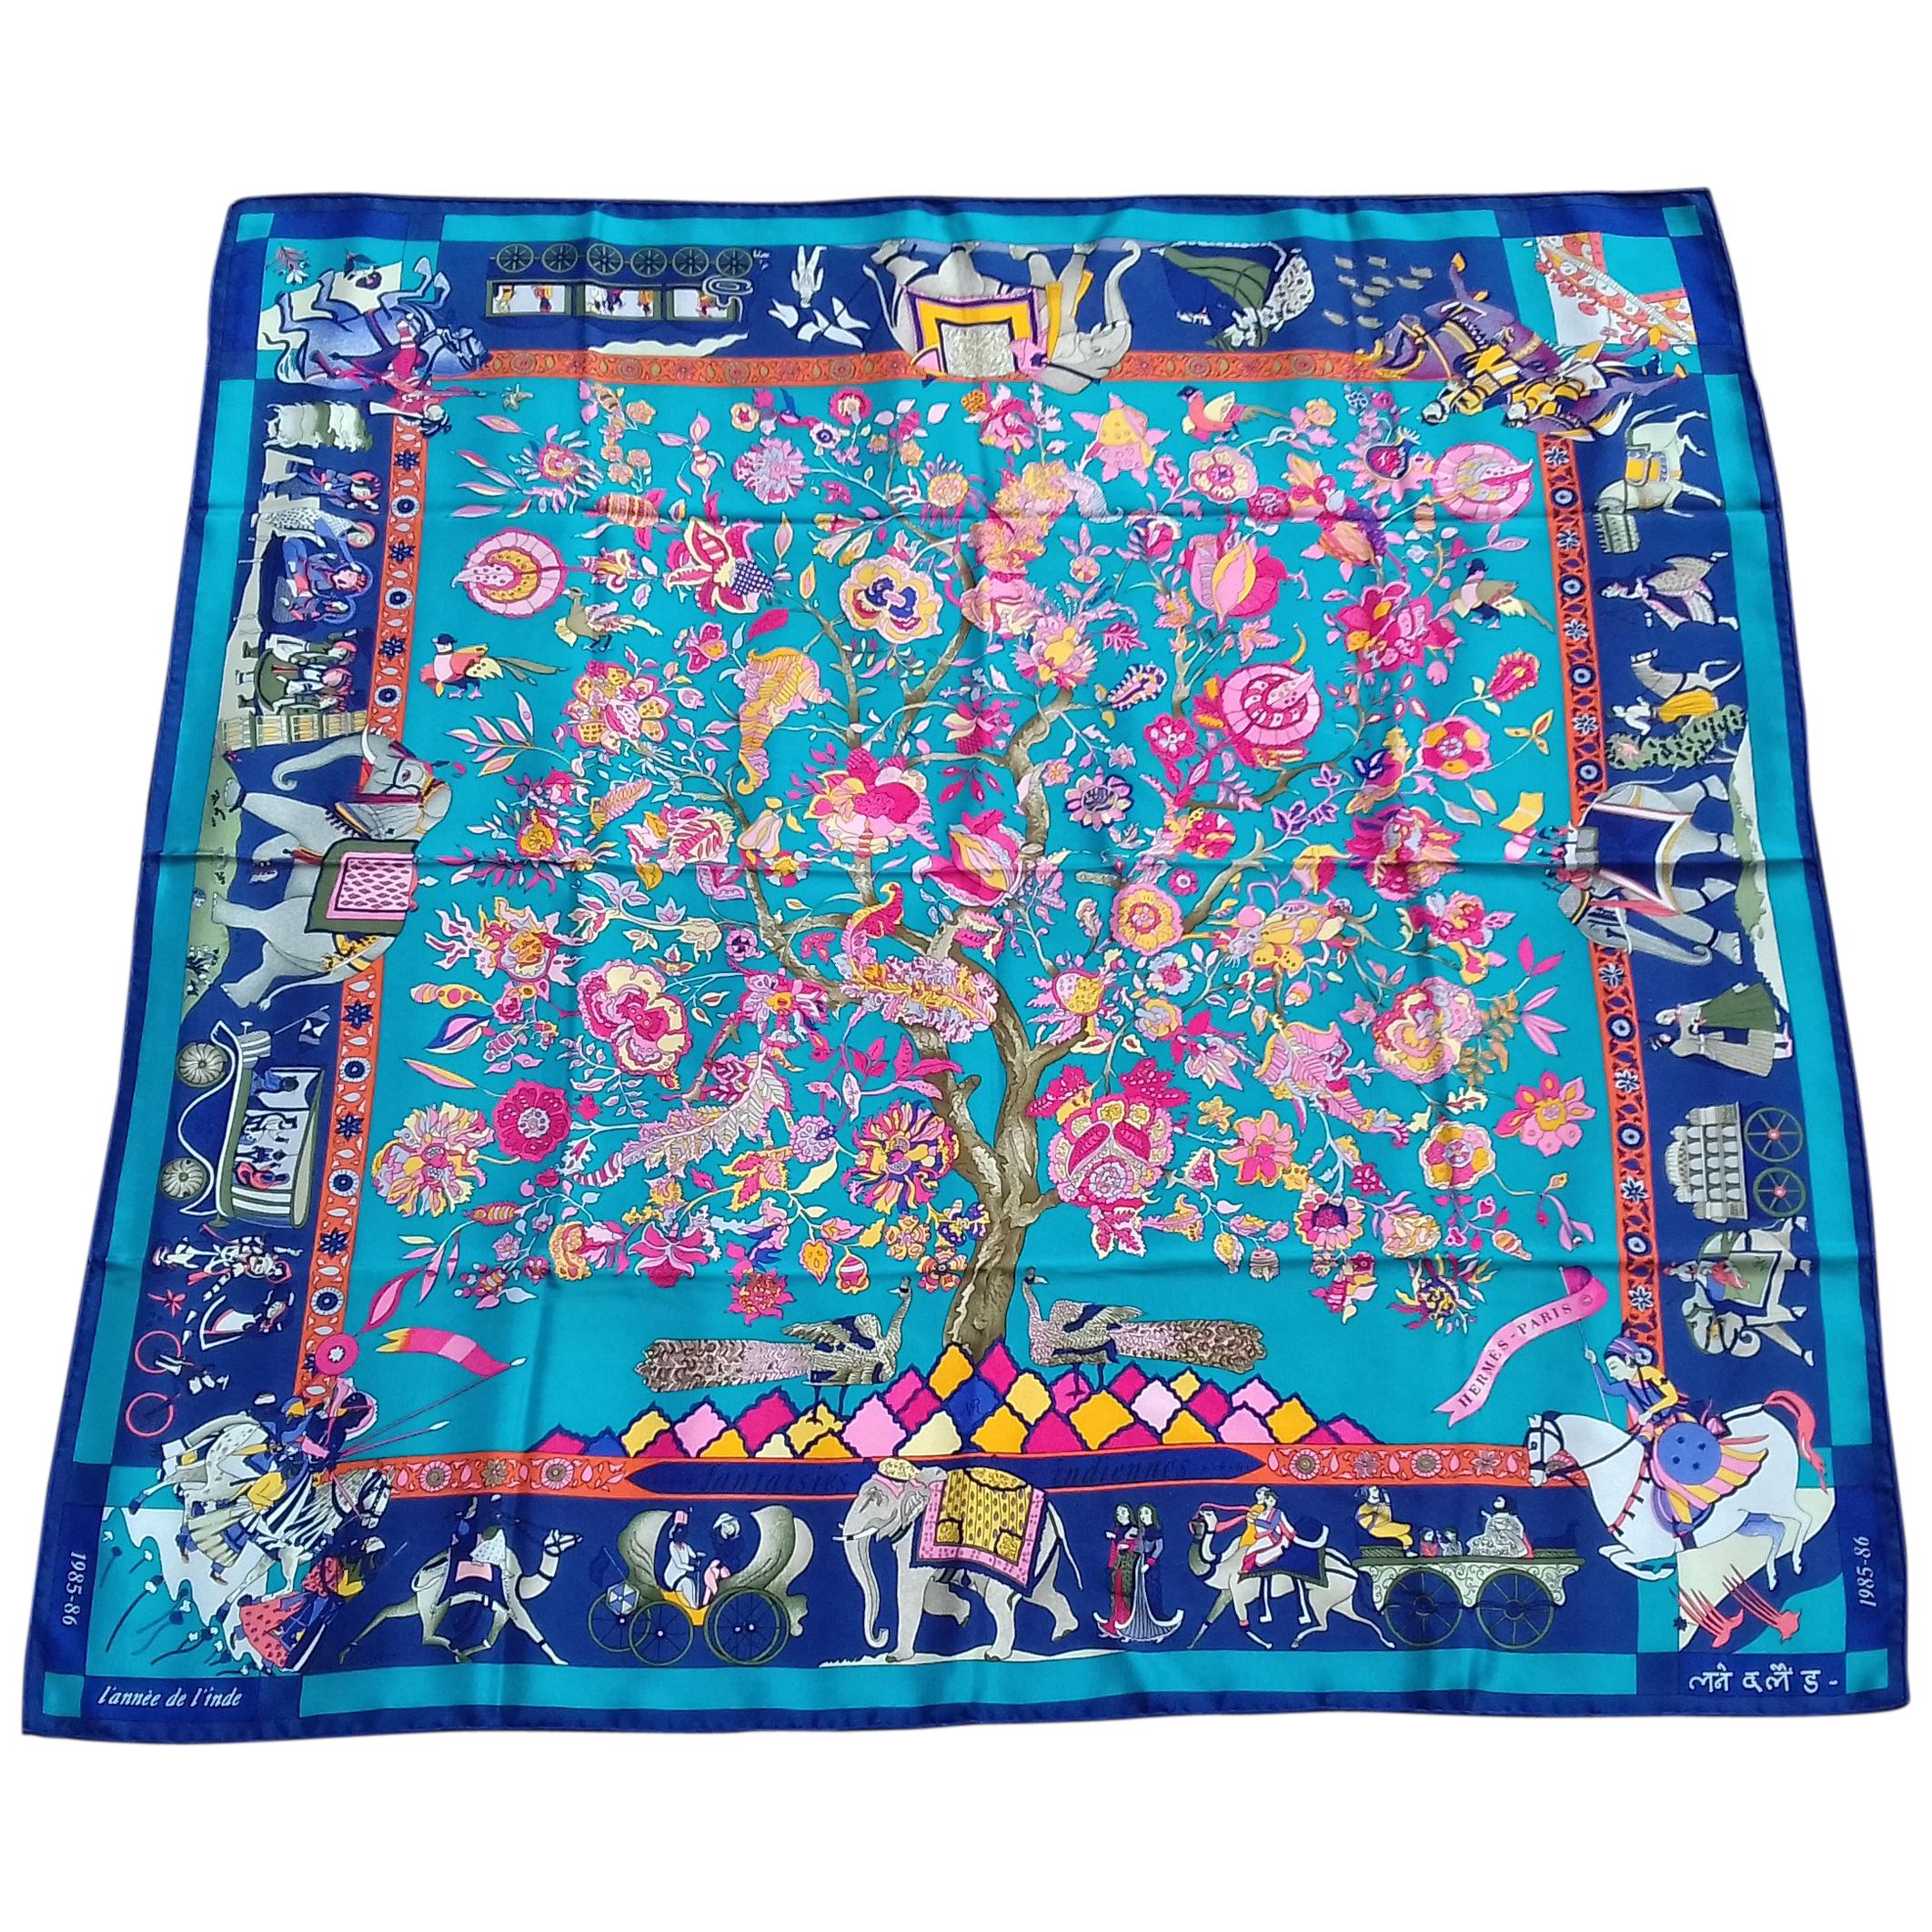 Hermès Silk Scarf Fantaisies Indiennes Dubigeon Year Of India from 1985 Blue 90